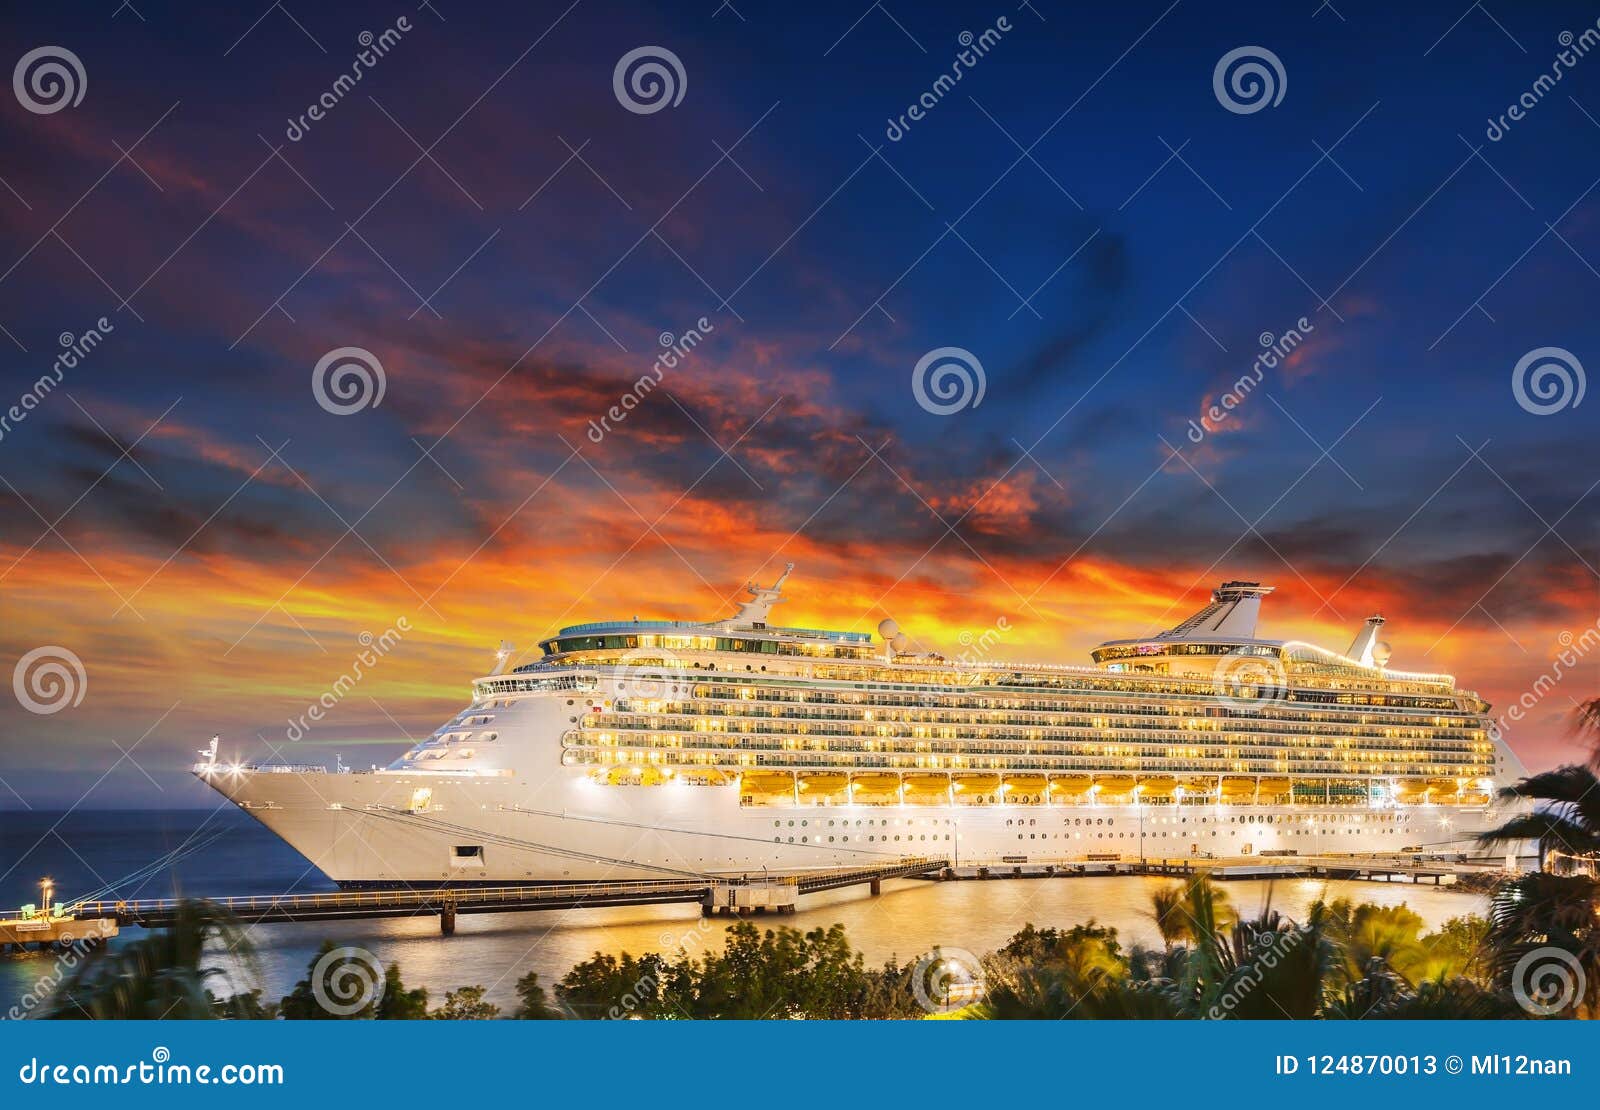 cruise ship in port on sunset.